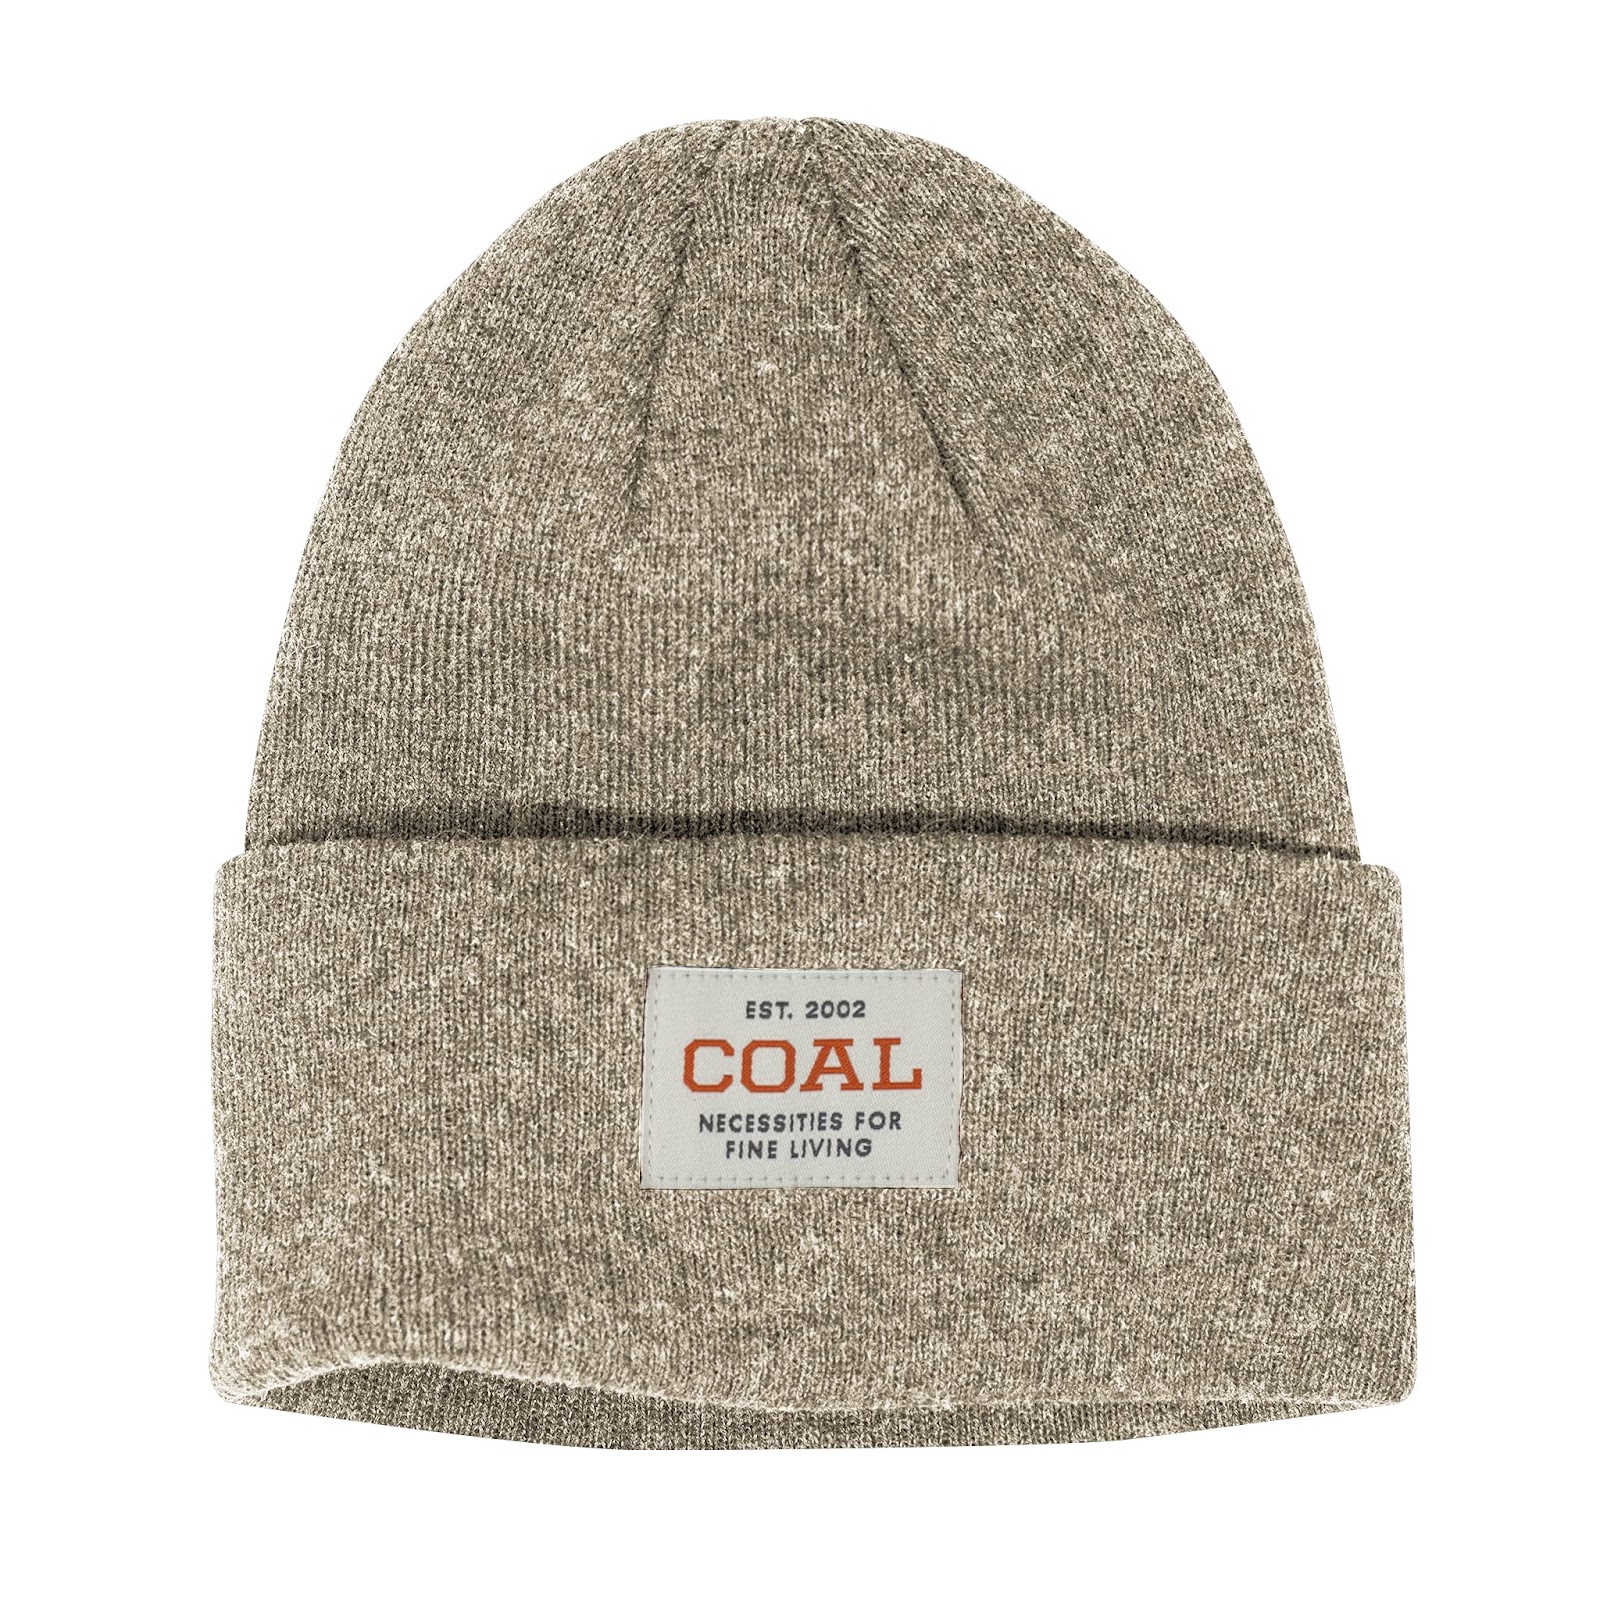 Coal Recycled Uniform Acrylic Tall Eco-Friendly Beanie Winter Hat Natural